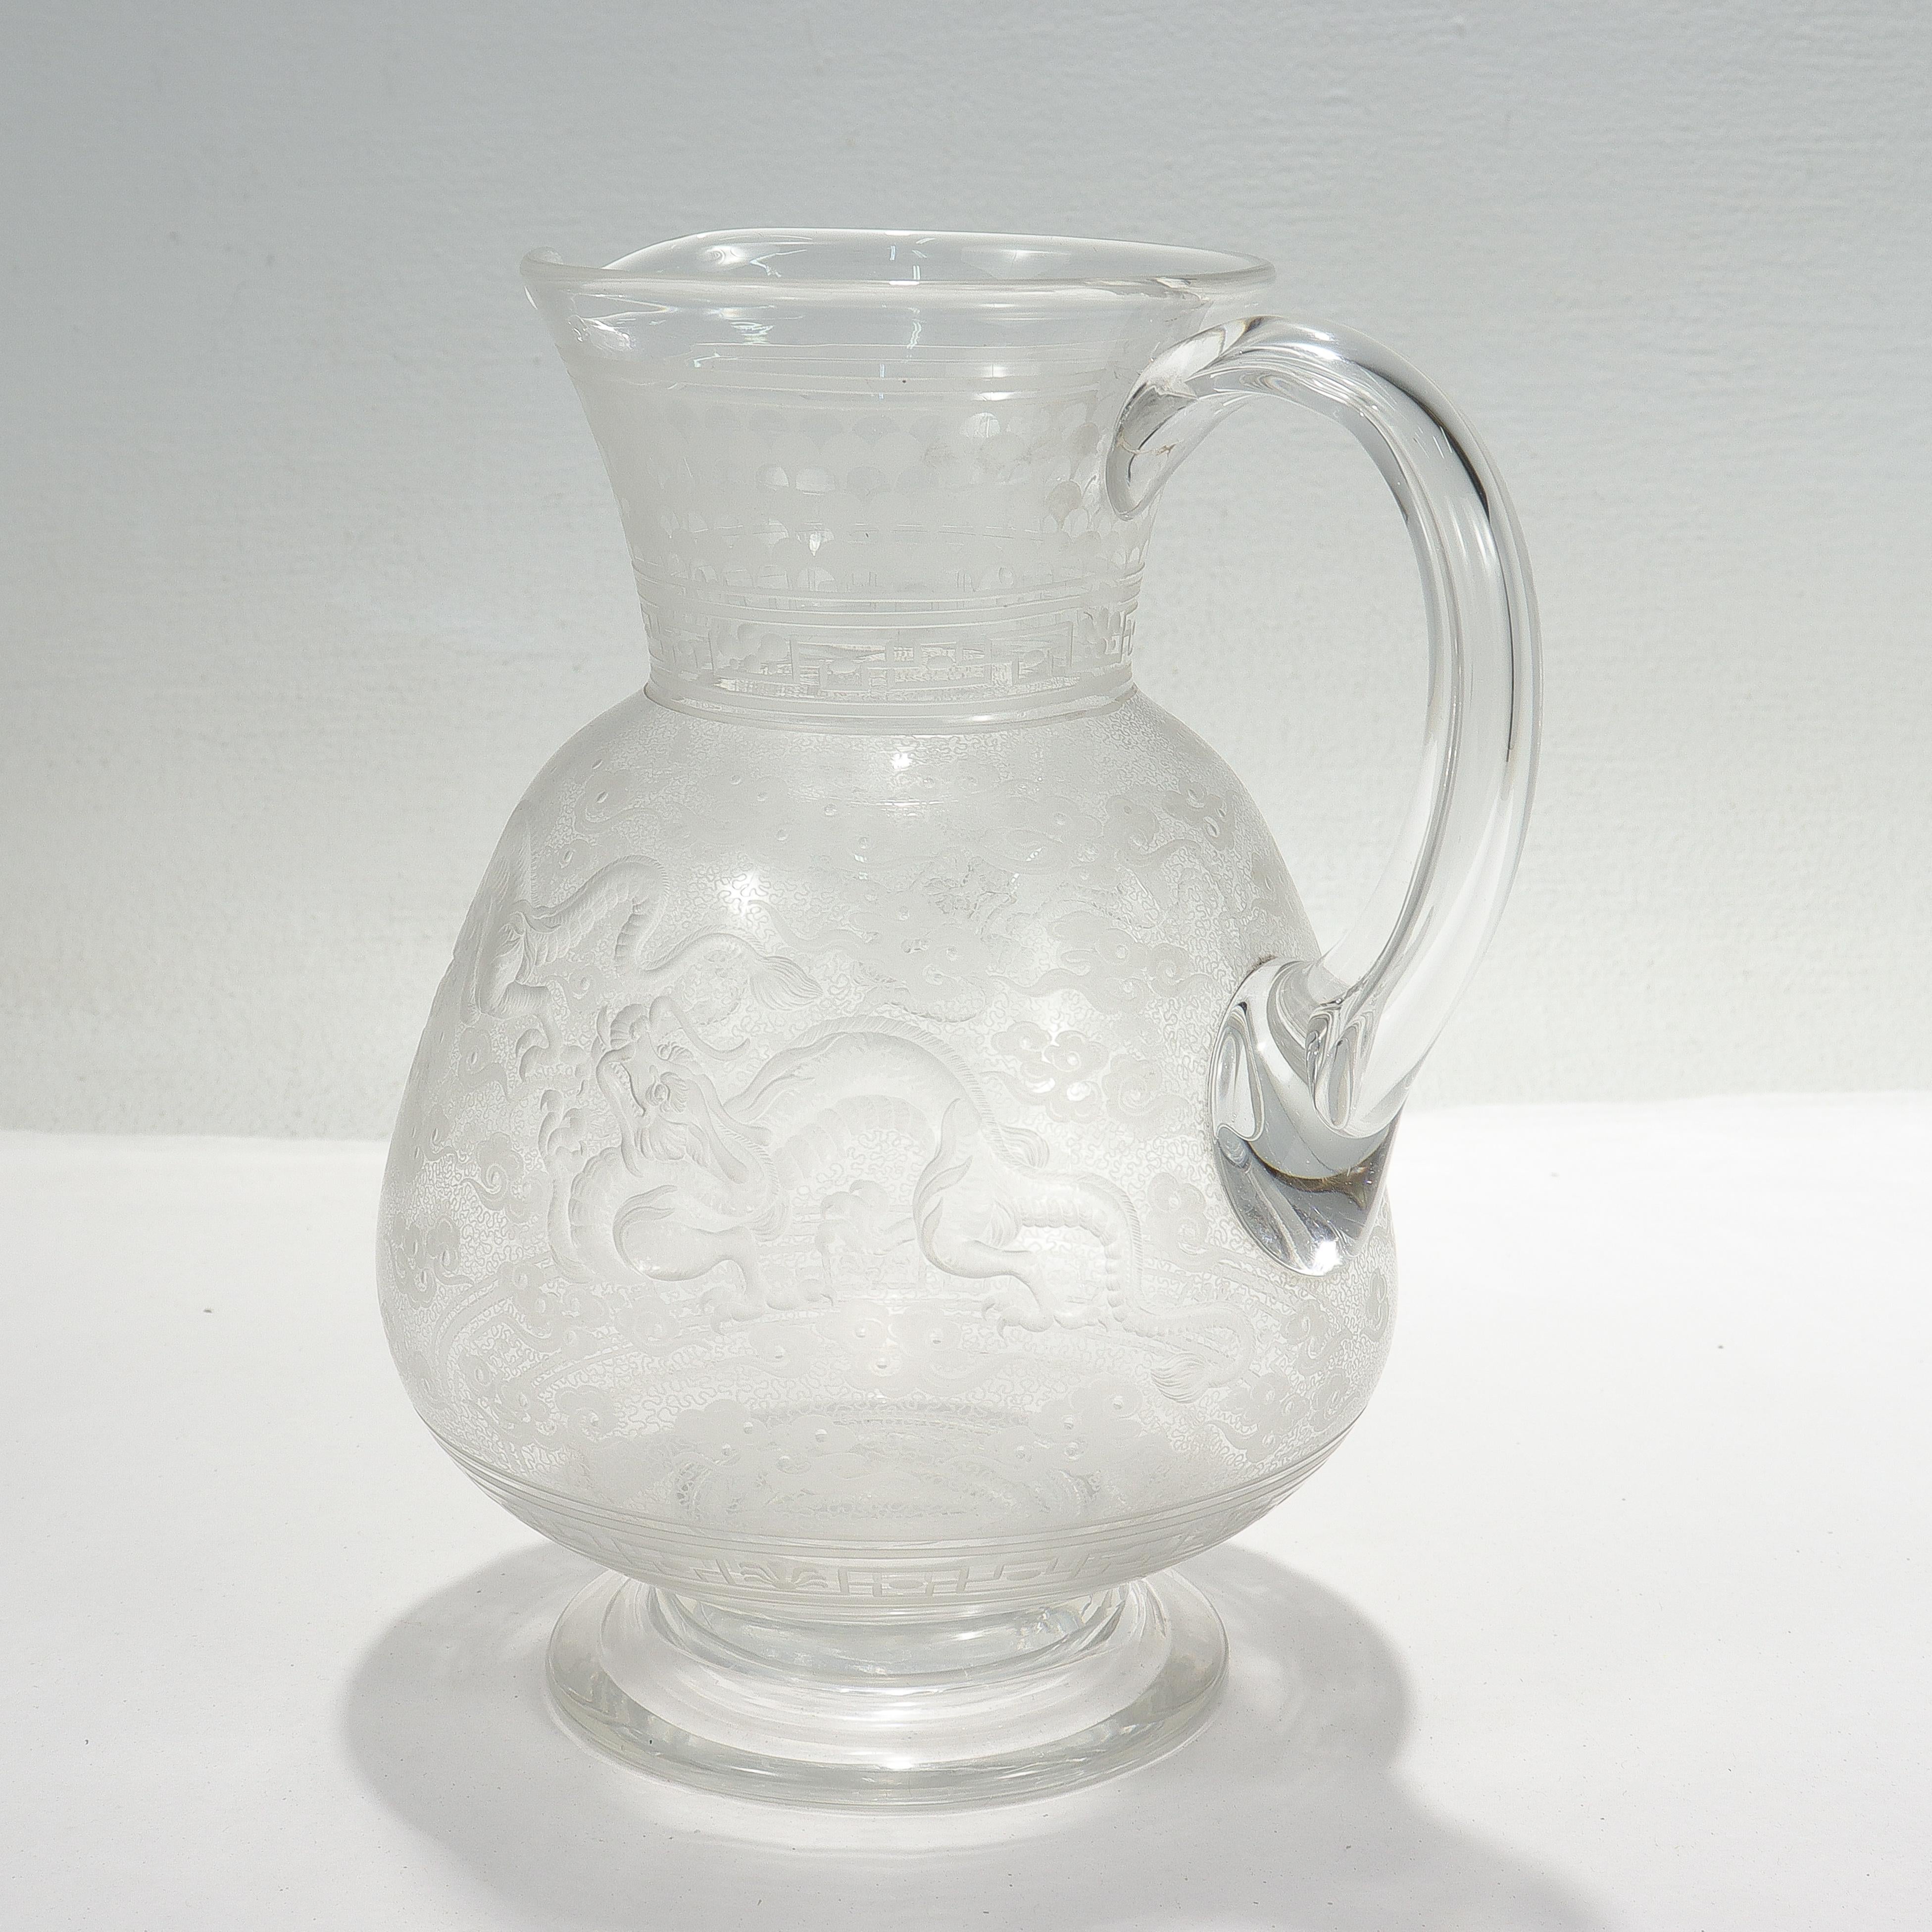 19th Century Antique Kny Attributed Stourbridge Engraved Glass Pitcher with Chinese Dragons For Sale